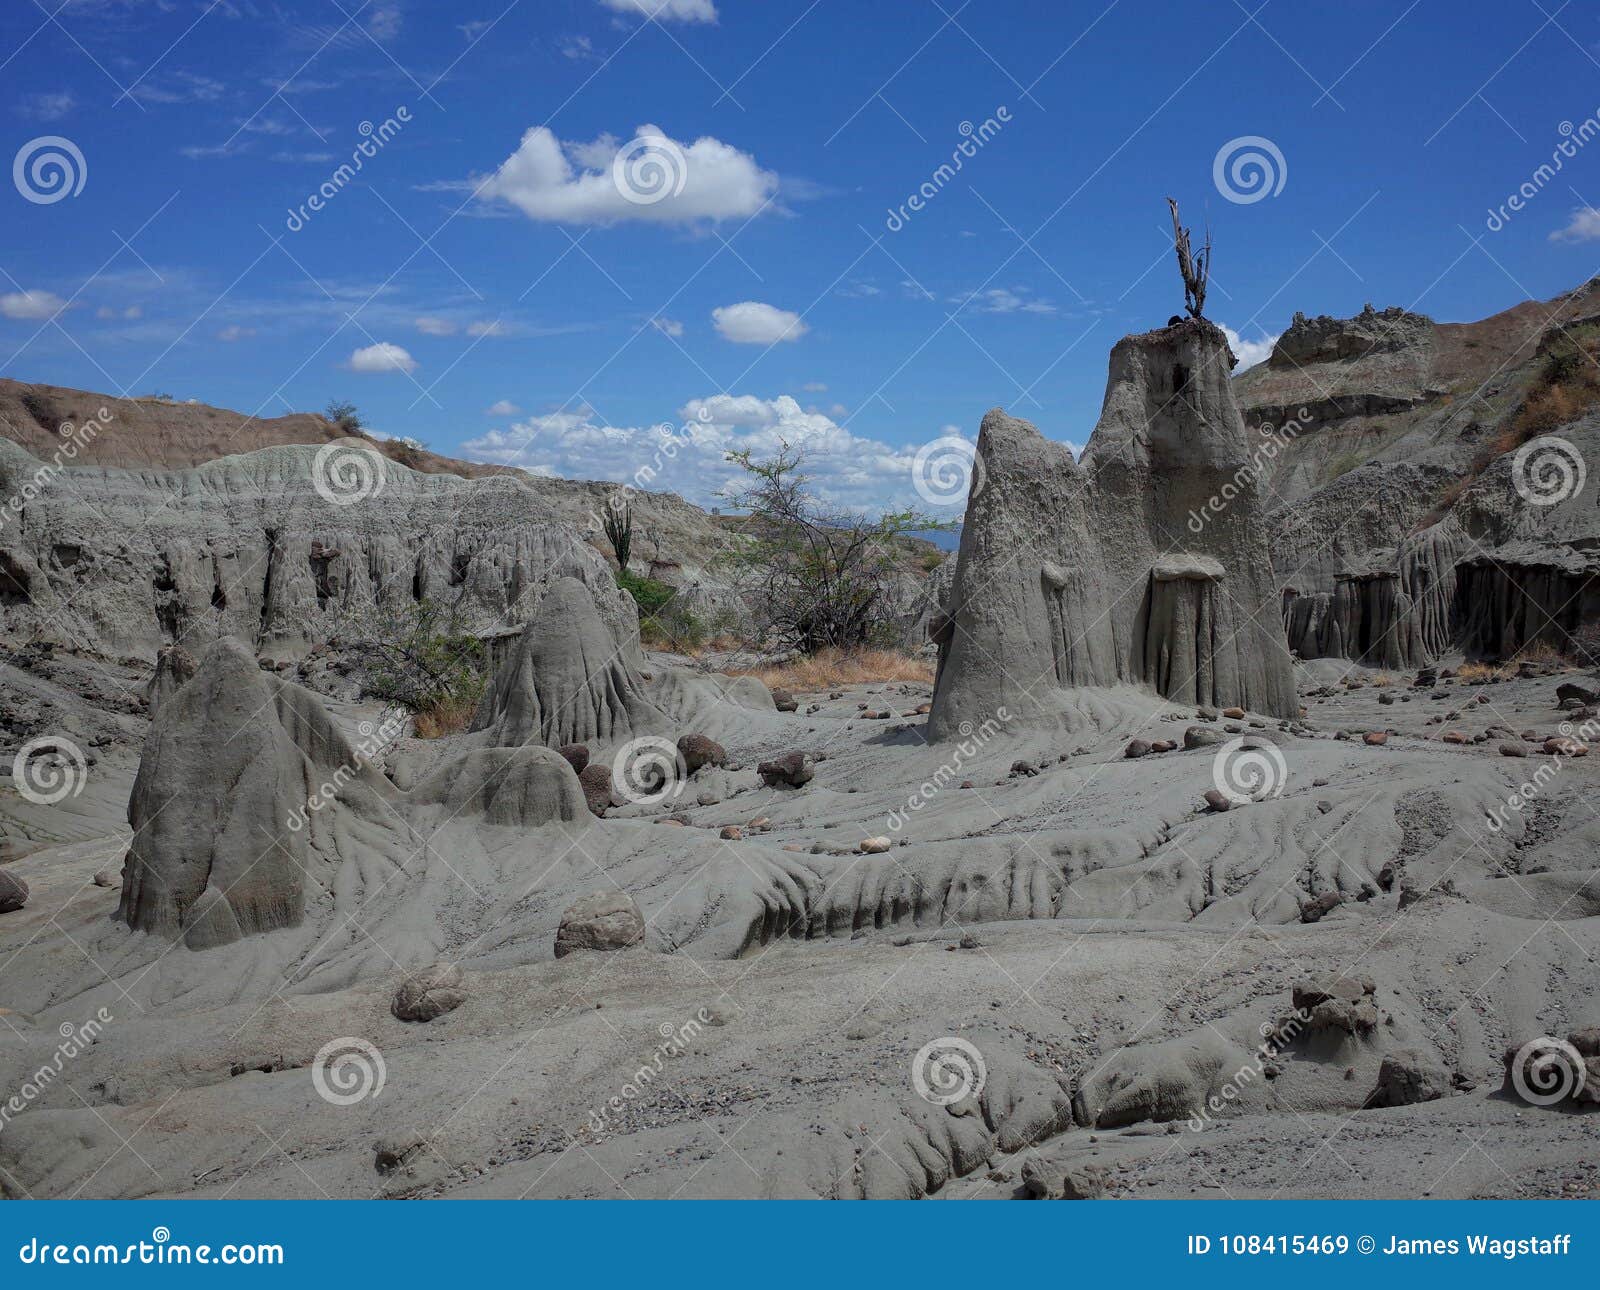 the lunar landscape of los hoyos, the grey desert, part of colombia`s tatacoa desert. the area is an ancient dried forest and pop